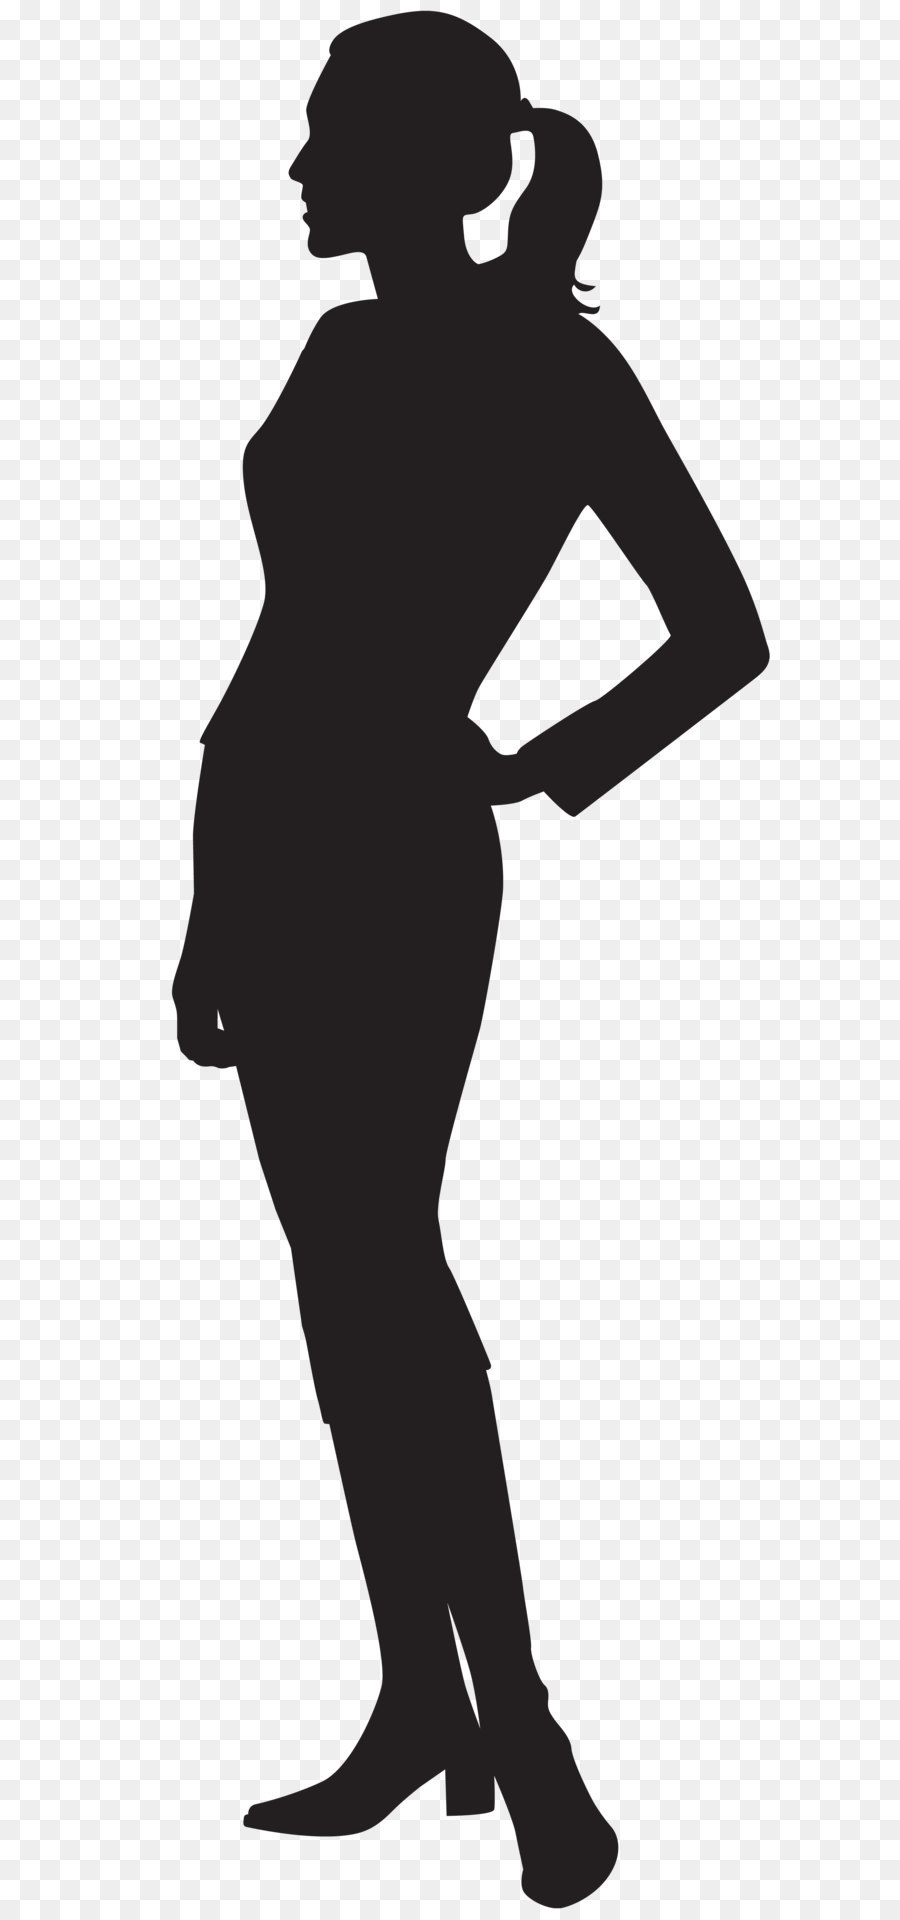 Black Silhouettes Of Beautiful Girls In Various Poses Royalty Free SVG,  Cliparts, Vectors, and Stock Illustration. Image 60551488.